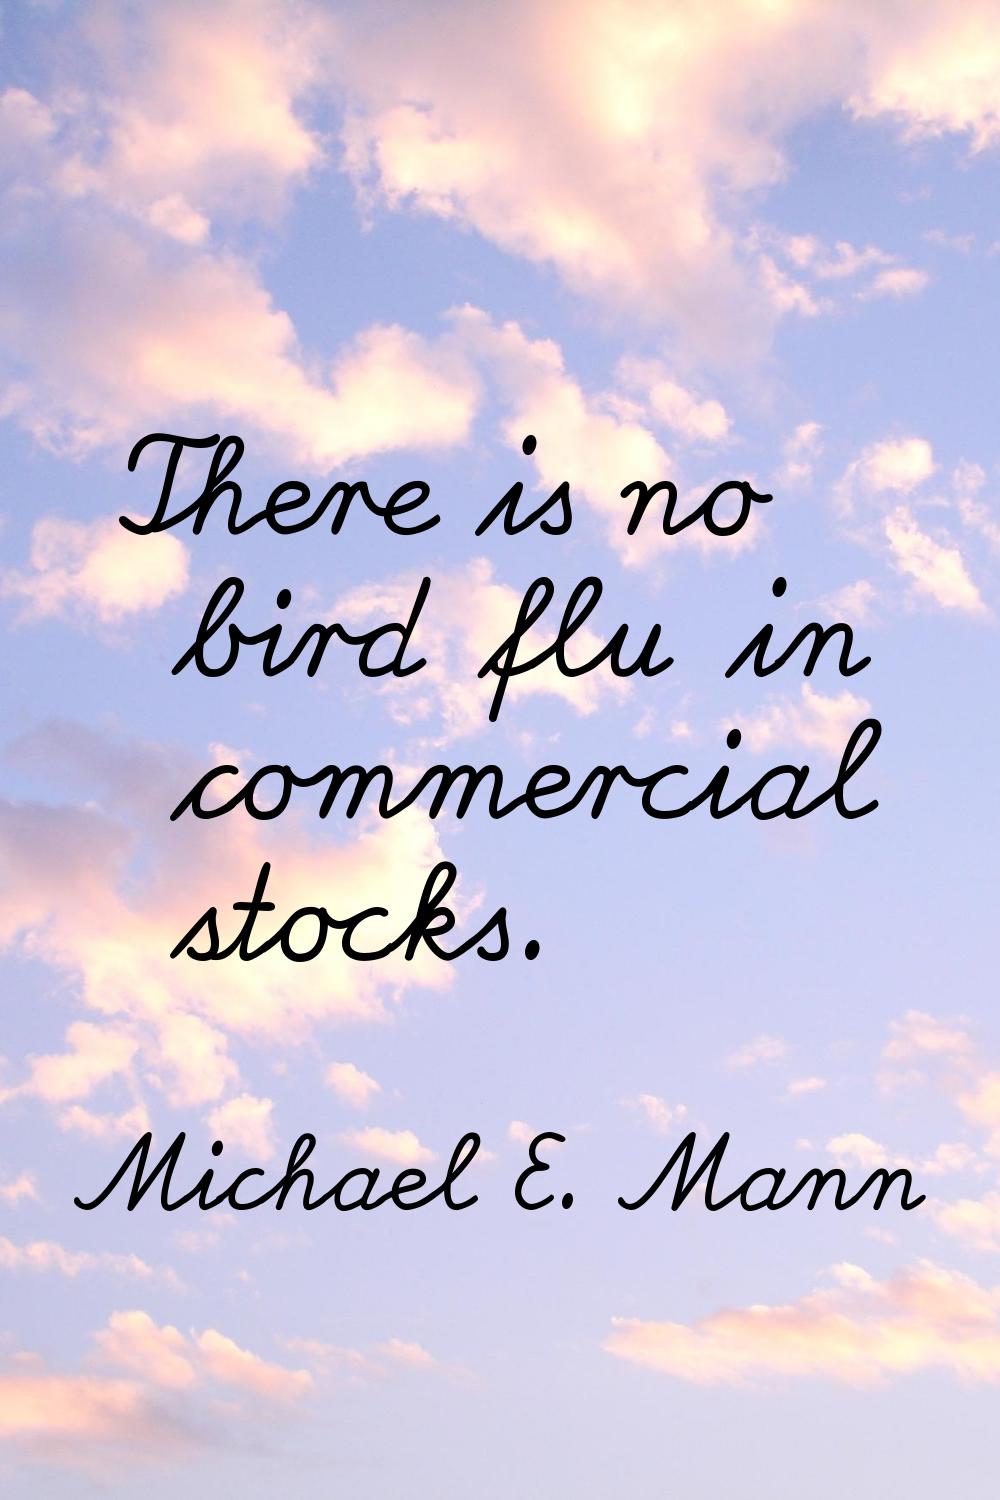 There is no bird flu in commercial stocks.